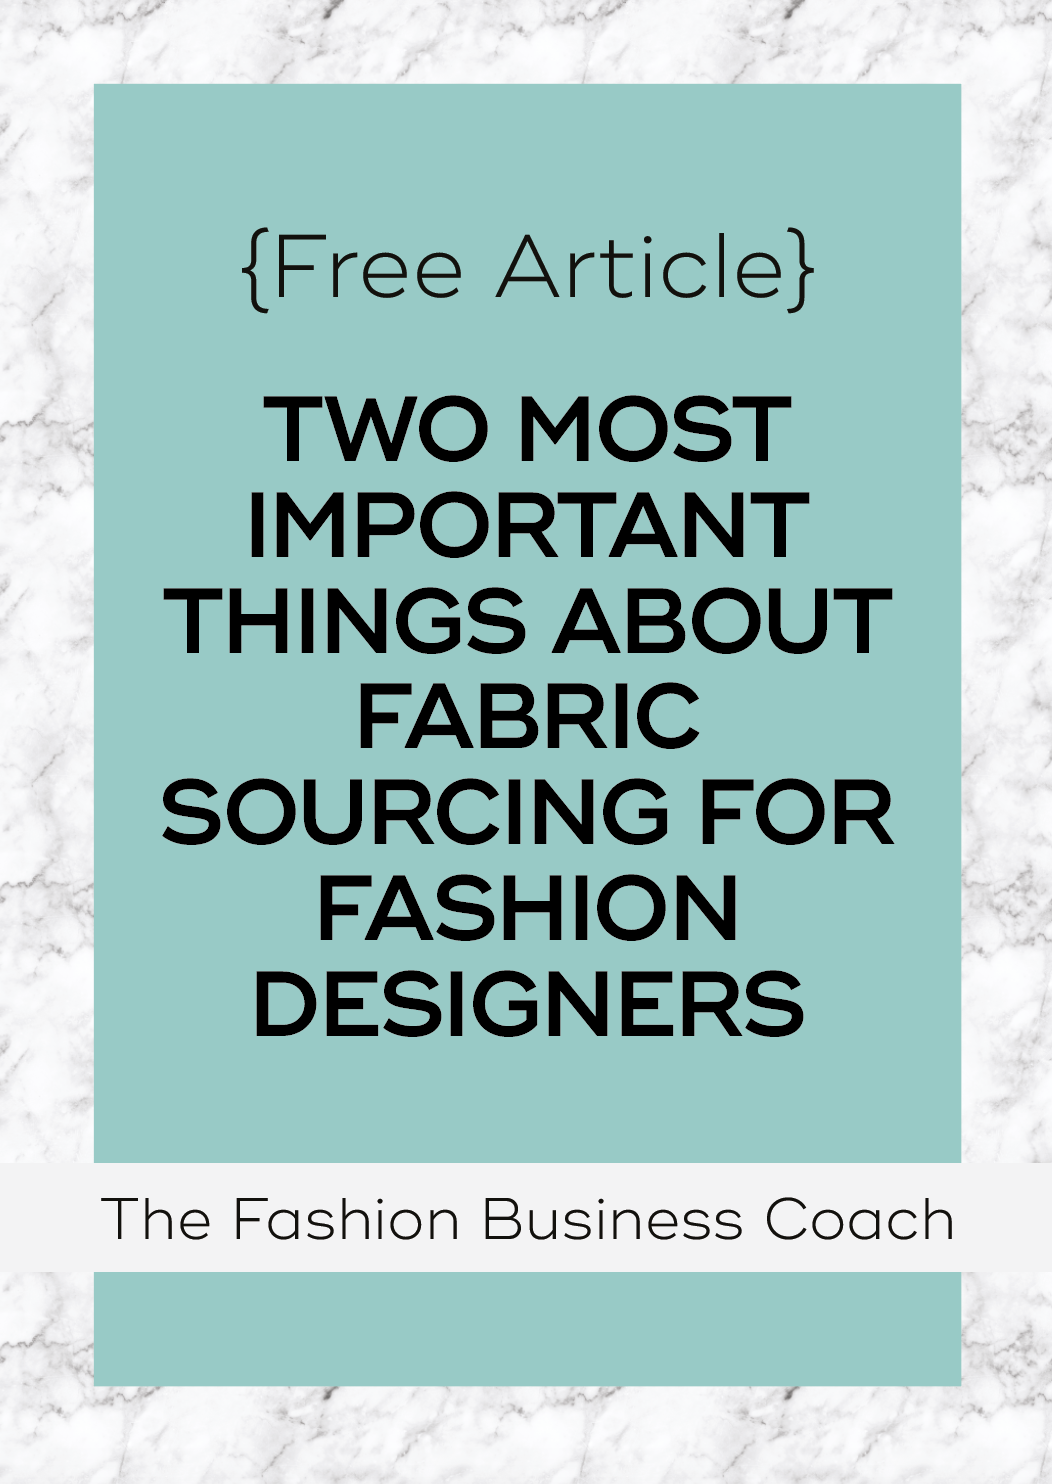 Fabric Sourcing for Fashion Brands 9.png